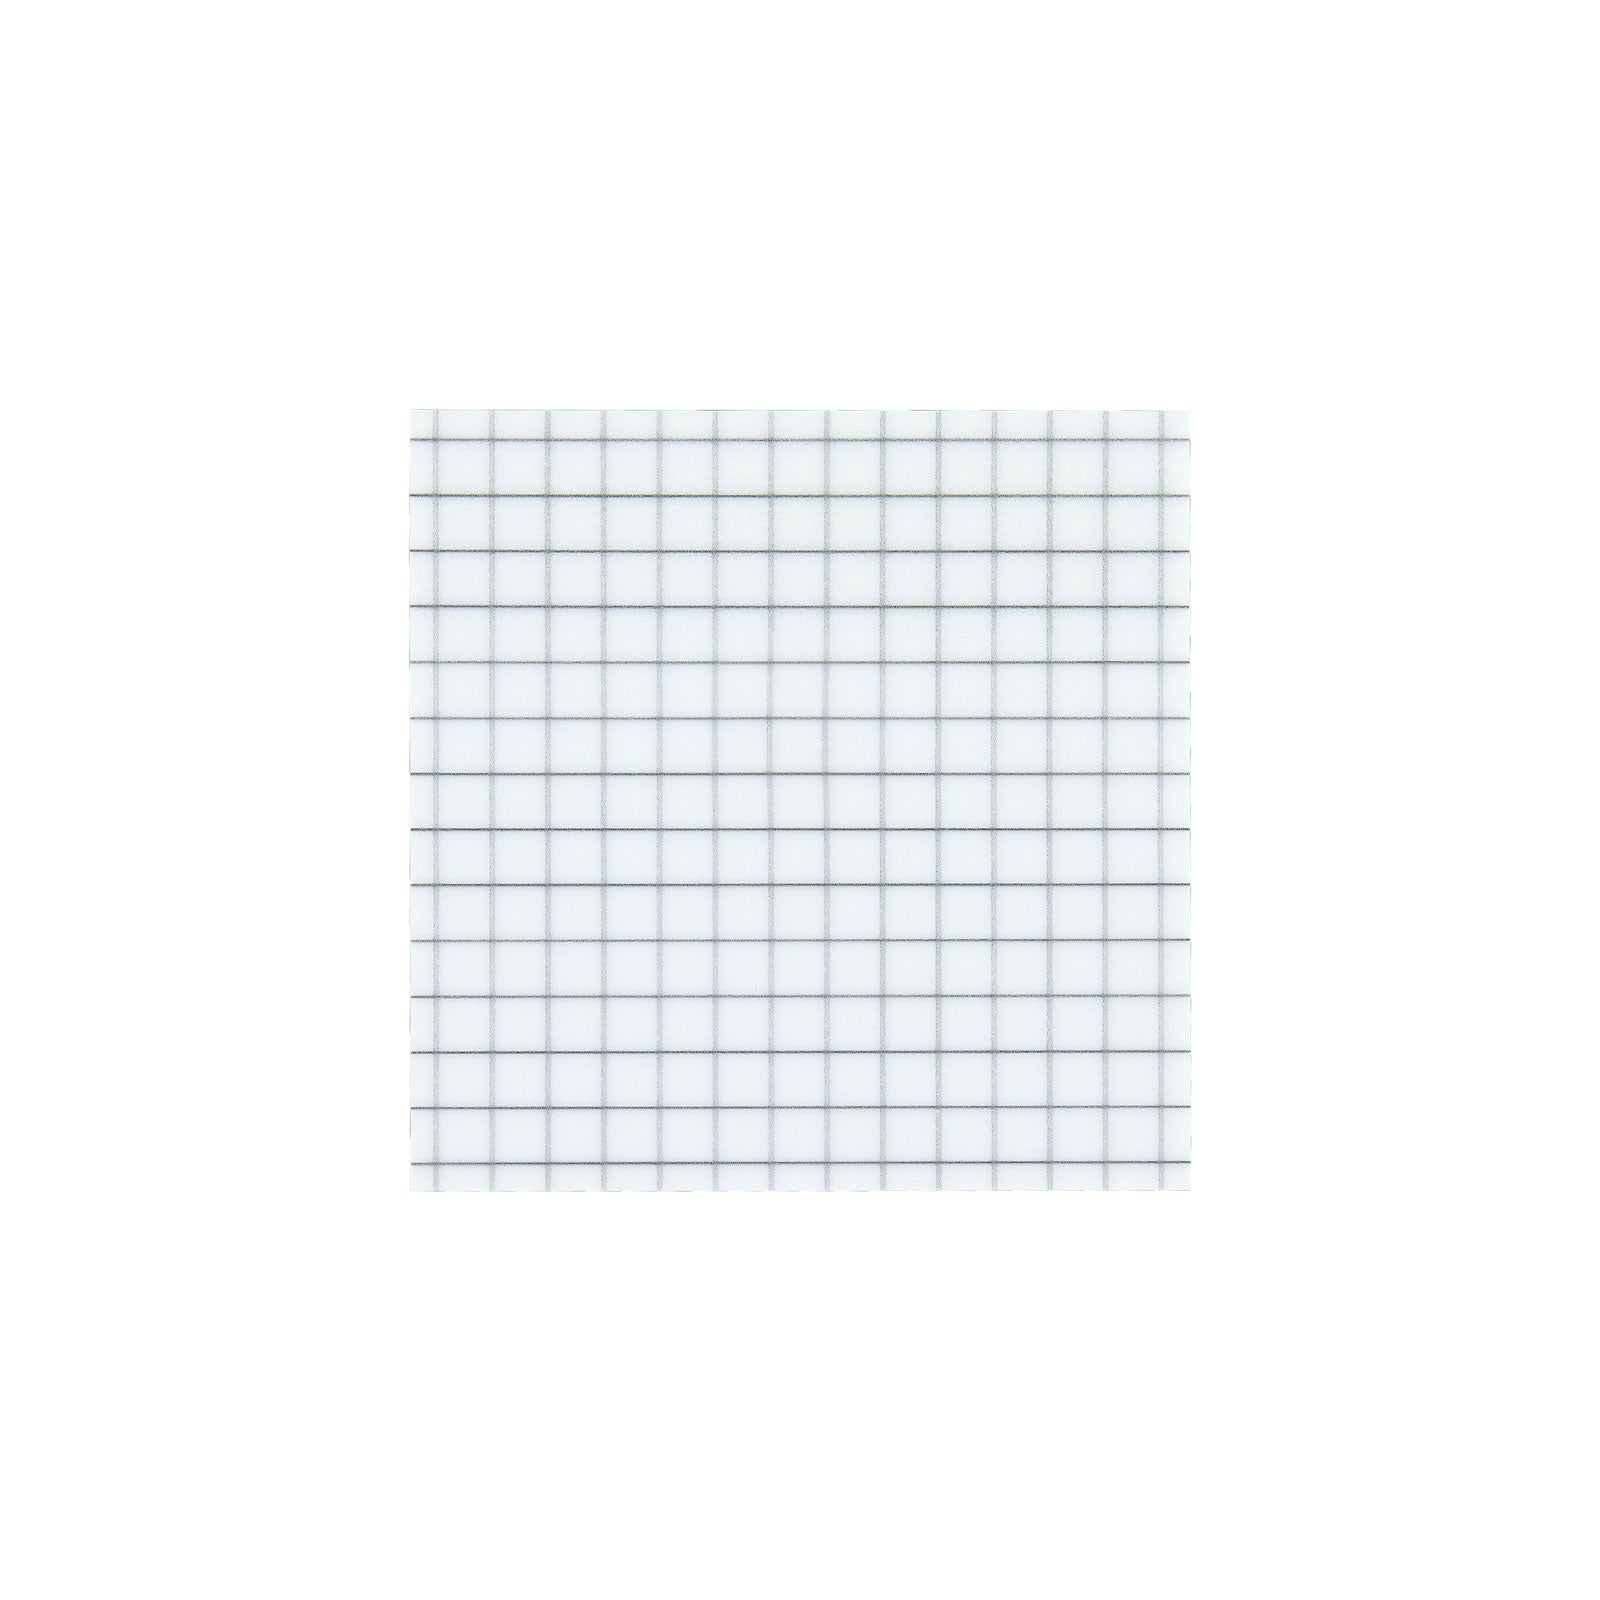 ST007 - Functional Grid - Sticky Notes